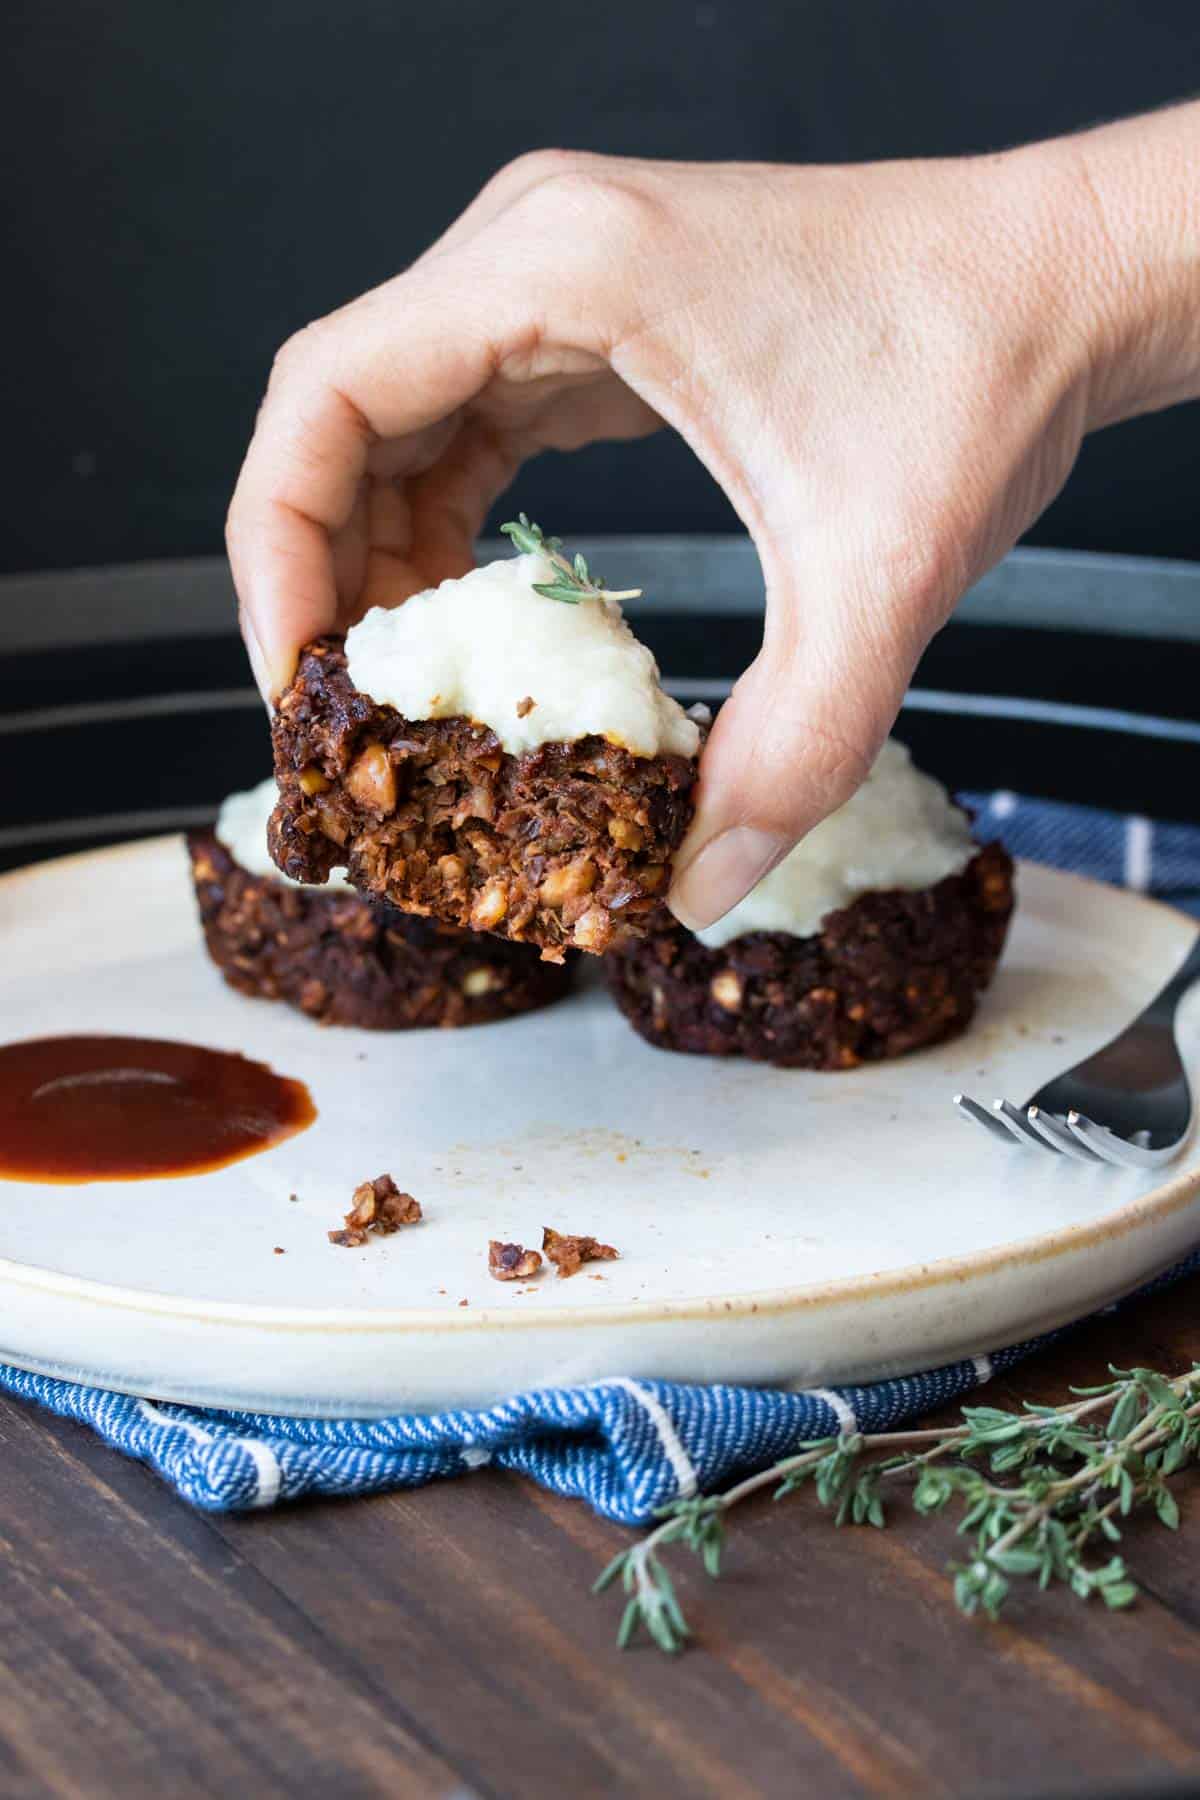 Lentil meatloaf cups on a plate and a hand picking up one